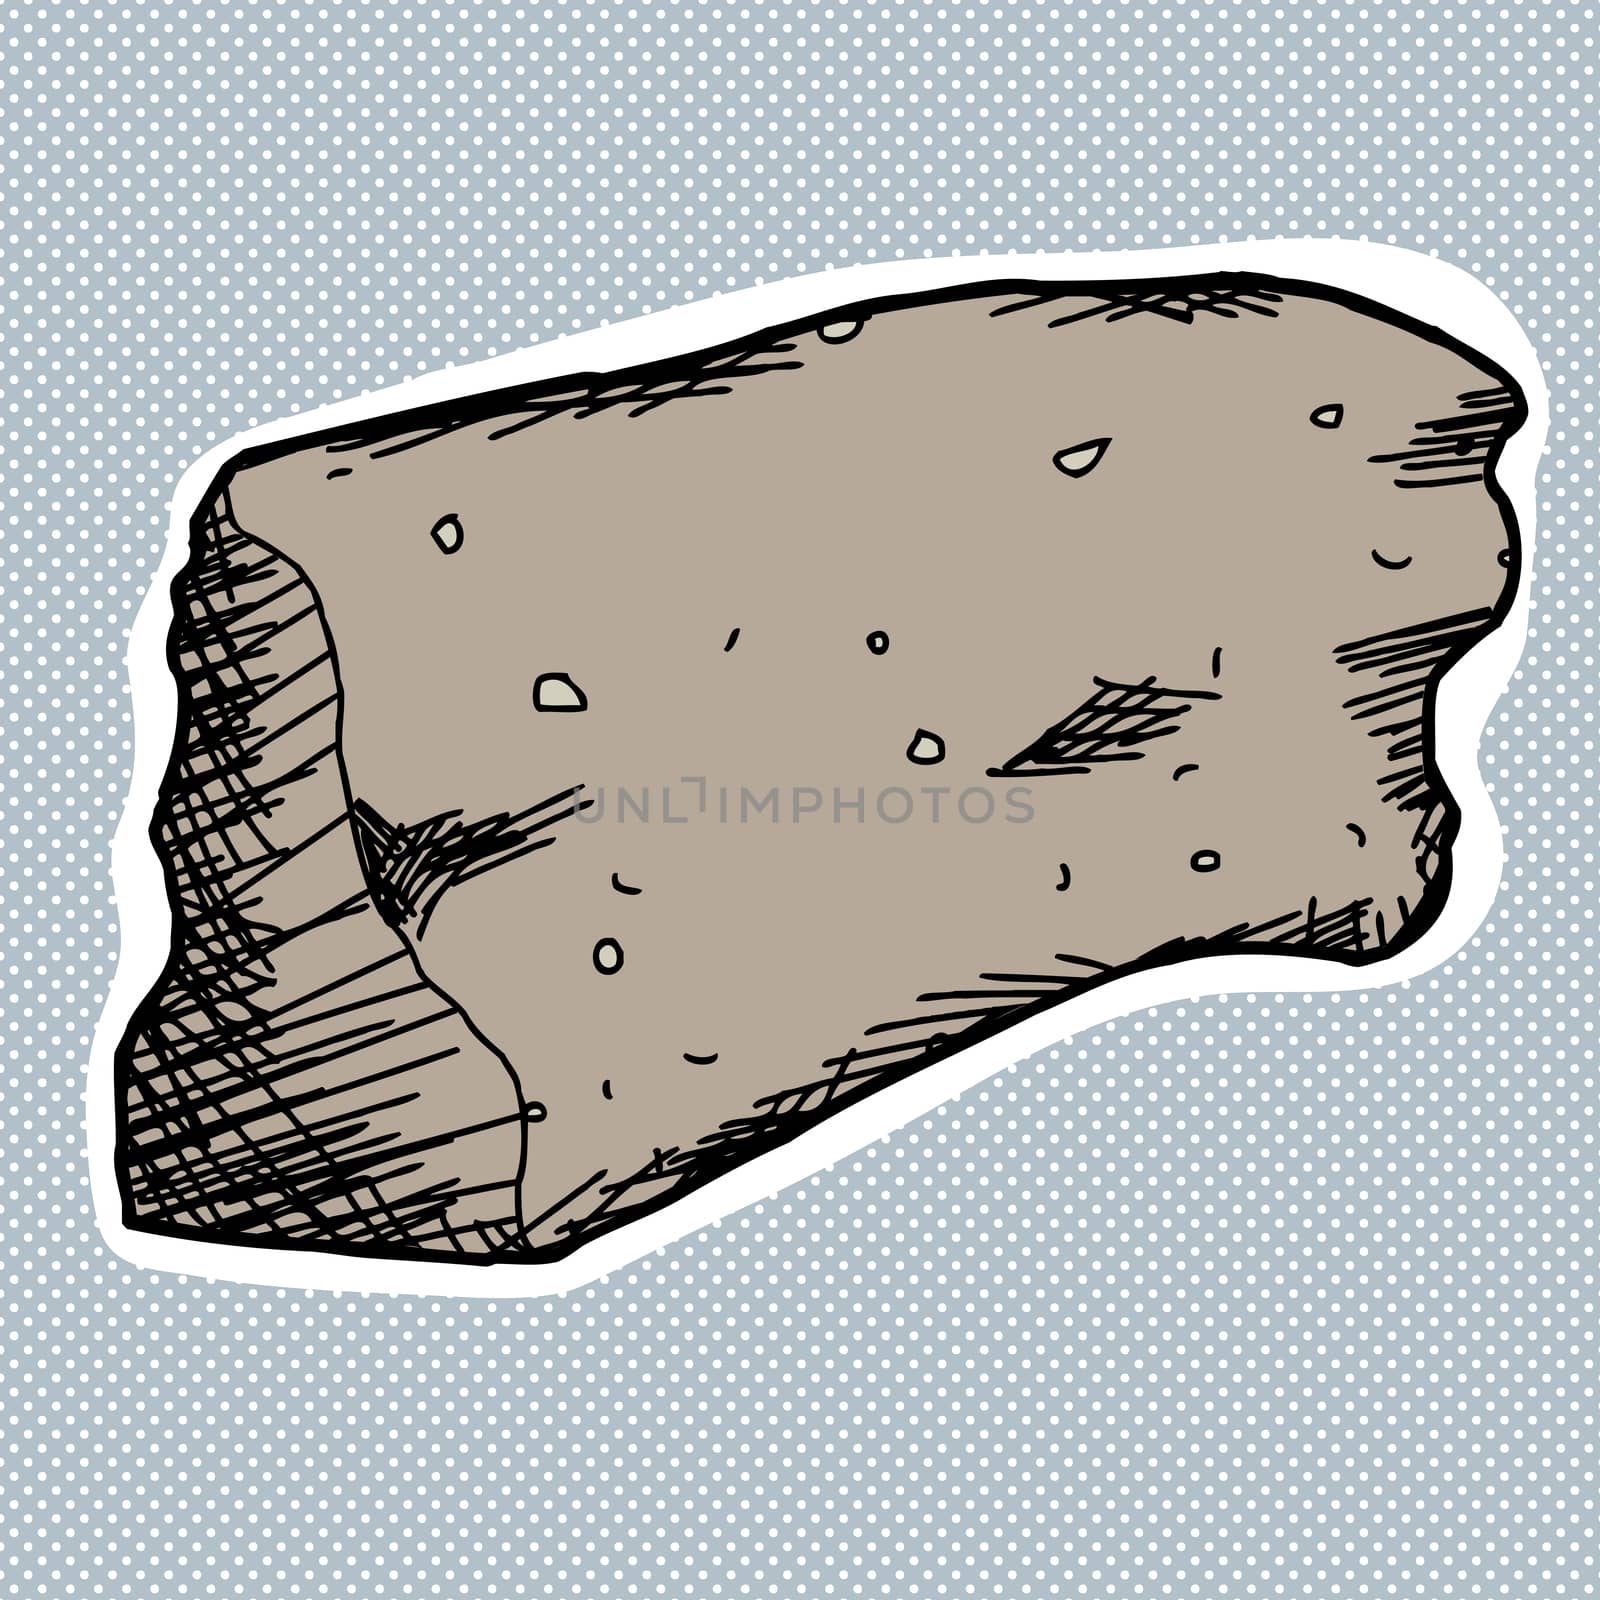 Hand drawn andesite rock sample over blue background